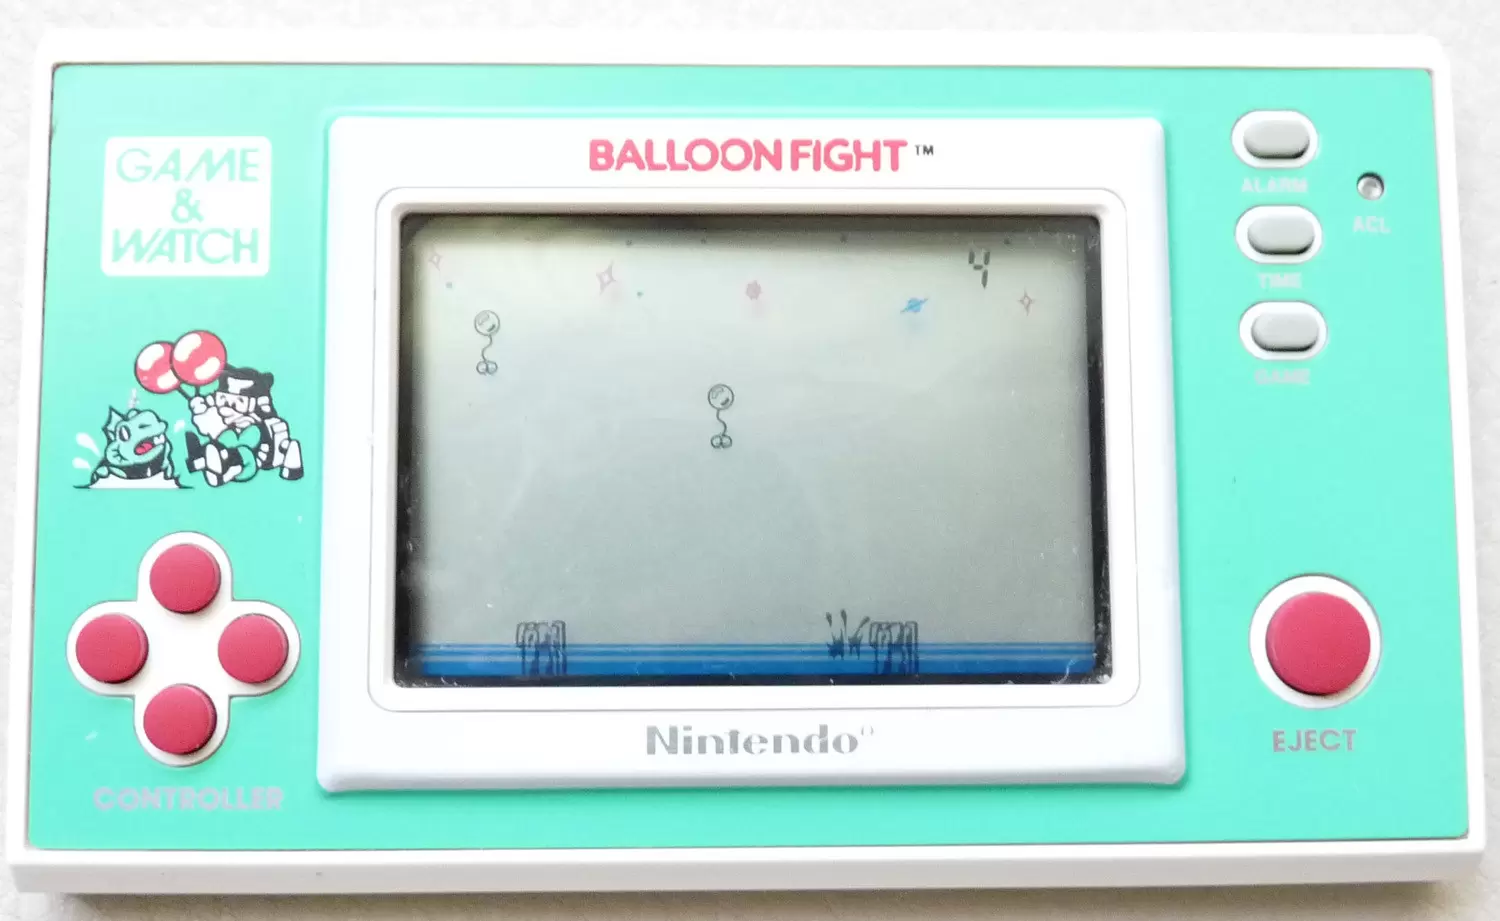 Game & Watch - Balloon Fight